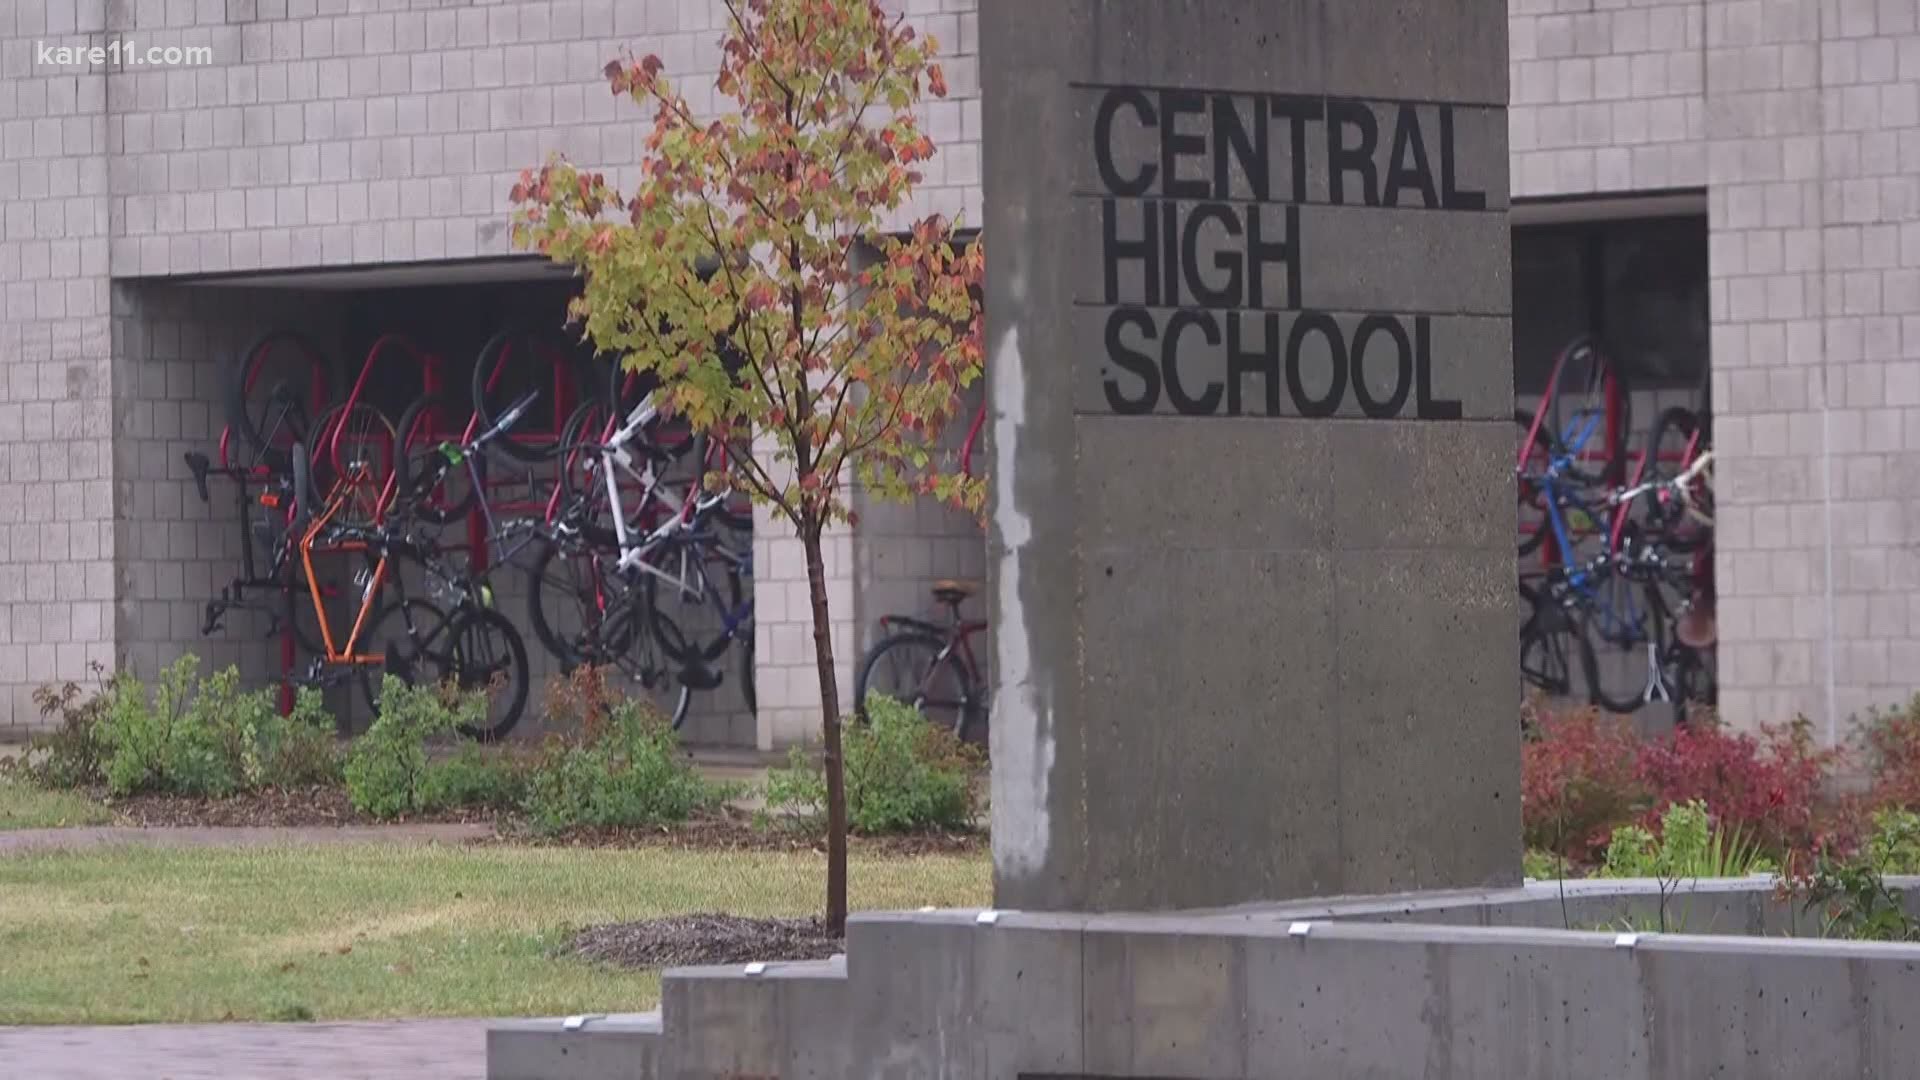 The school district will allow the contract with police to expire, meaning school resource officers won't be in the high school buildings next year.